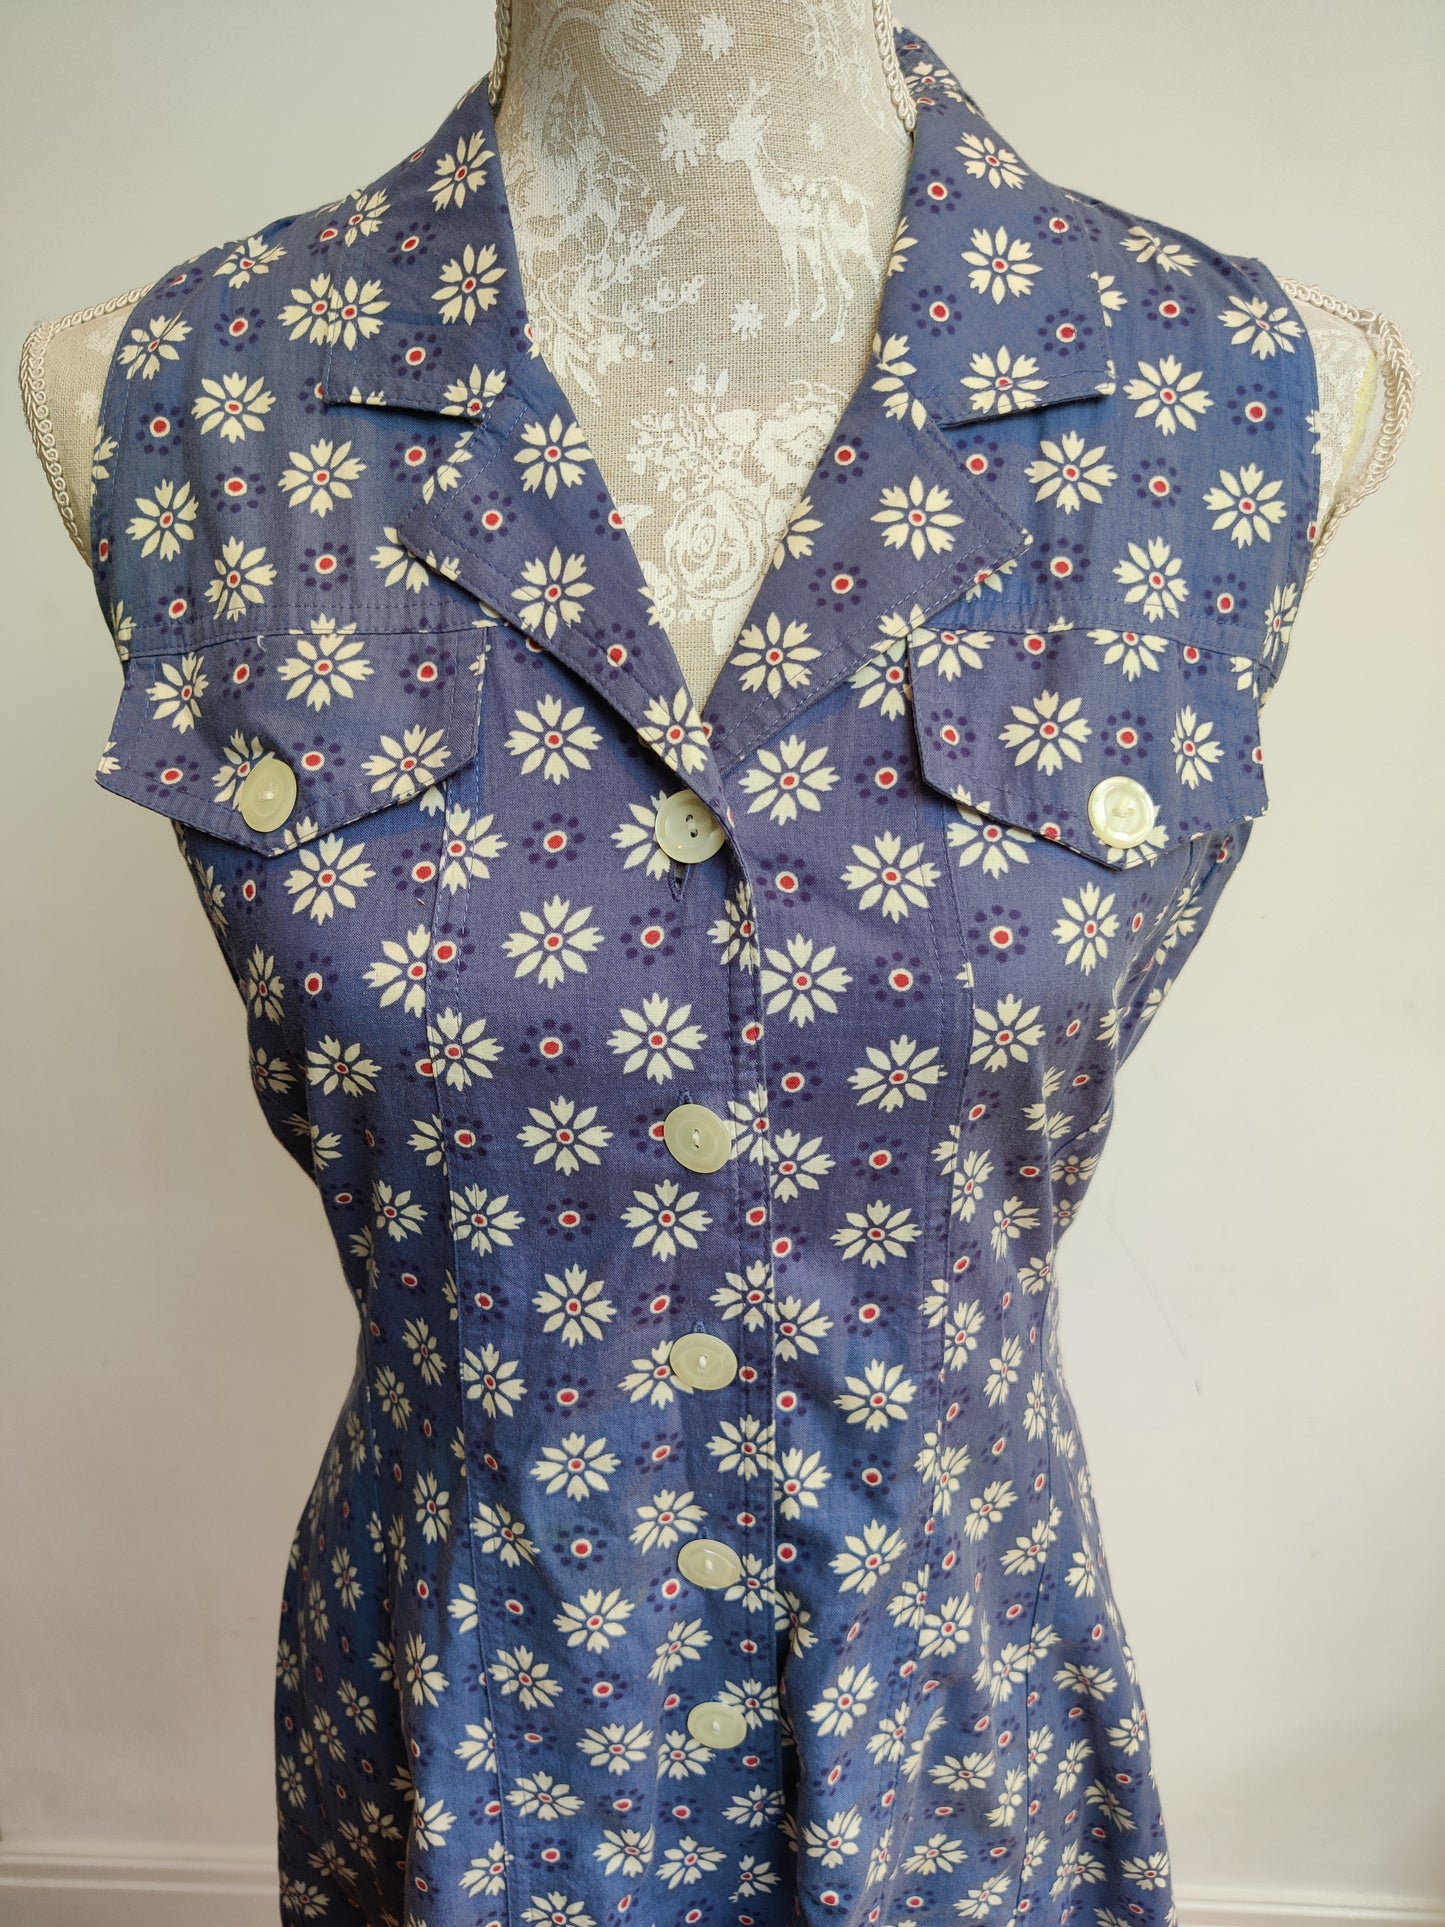 Blue and white button down playsuit. size 10